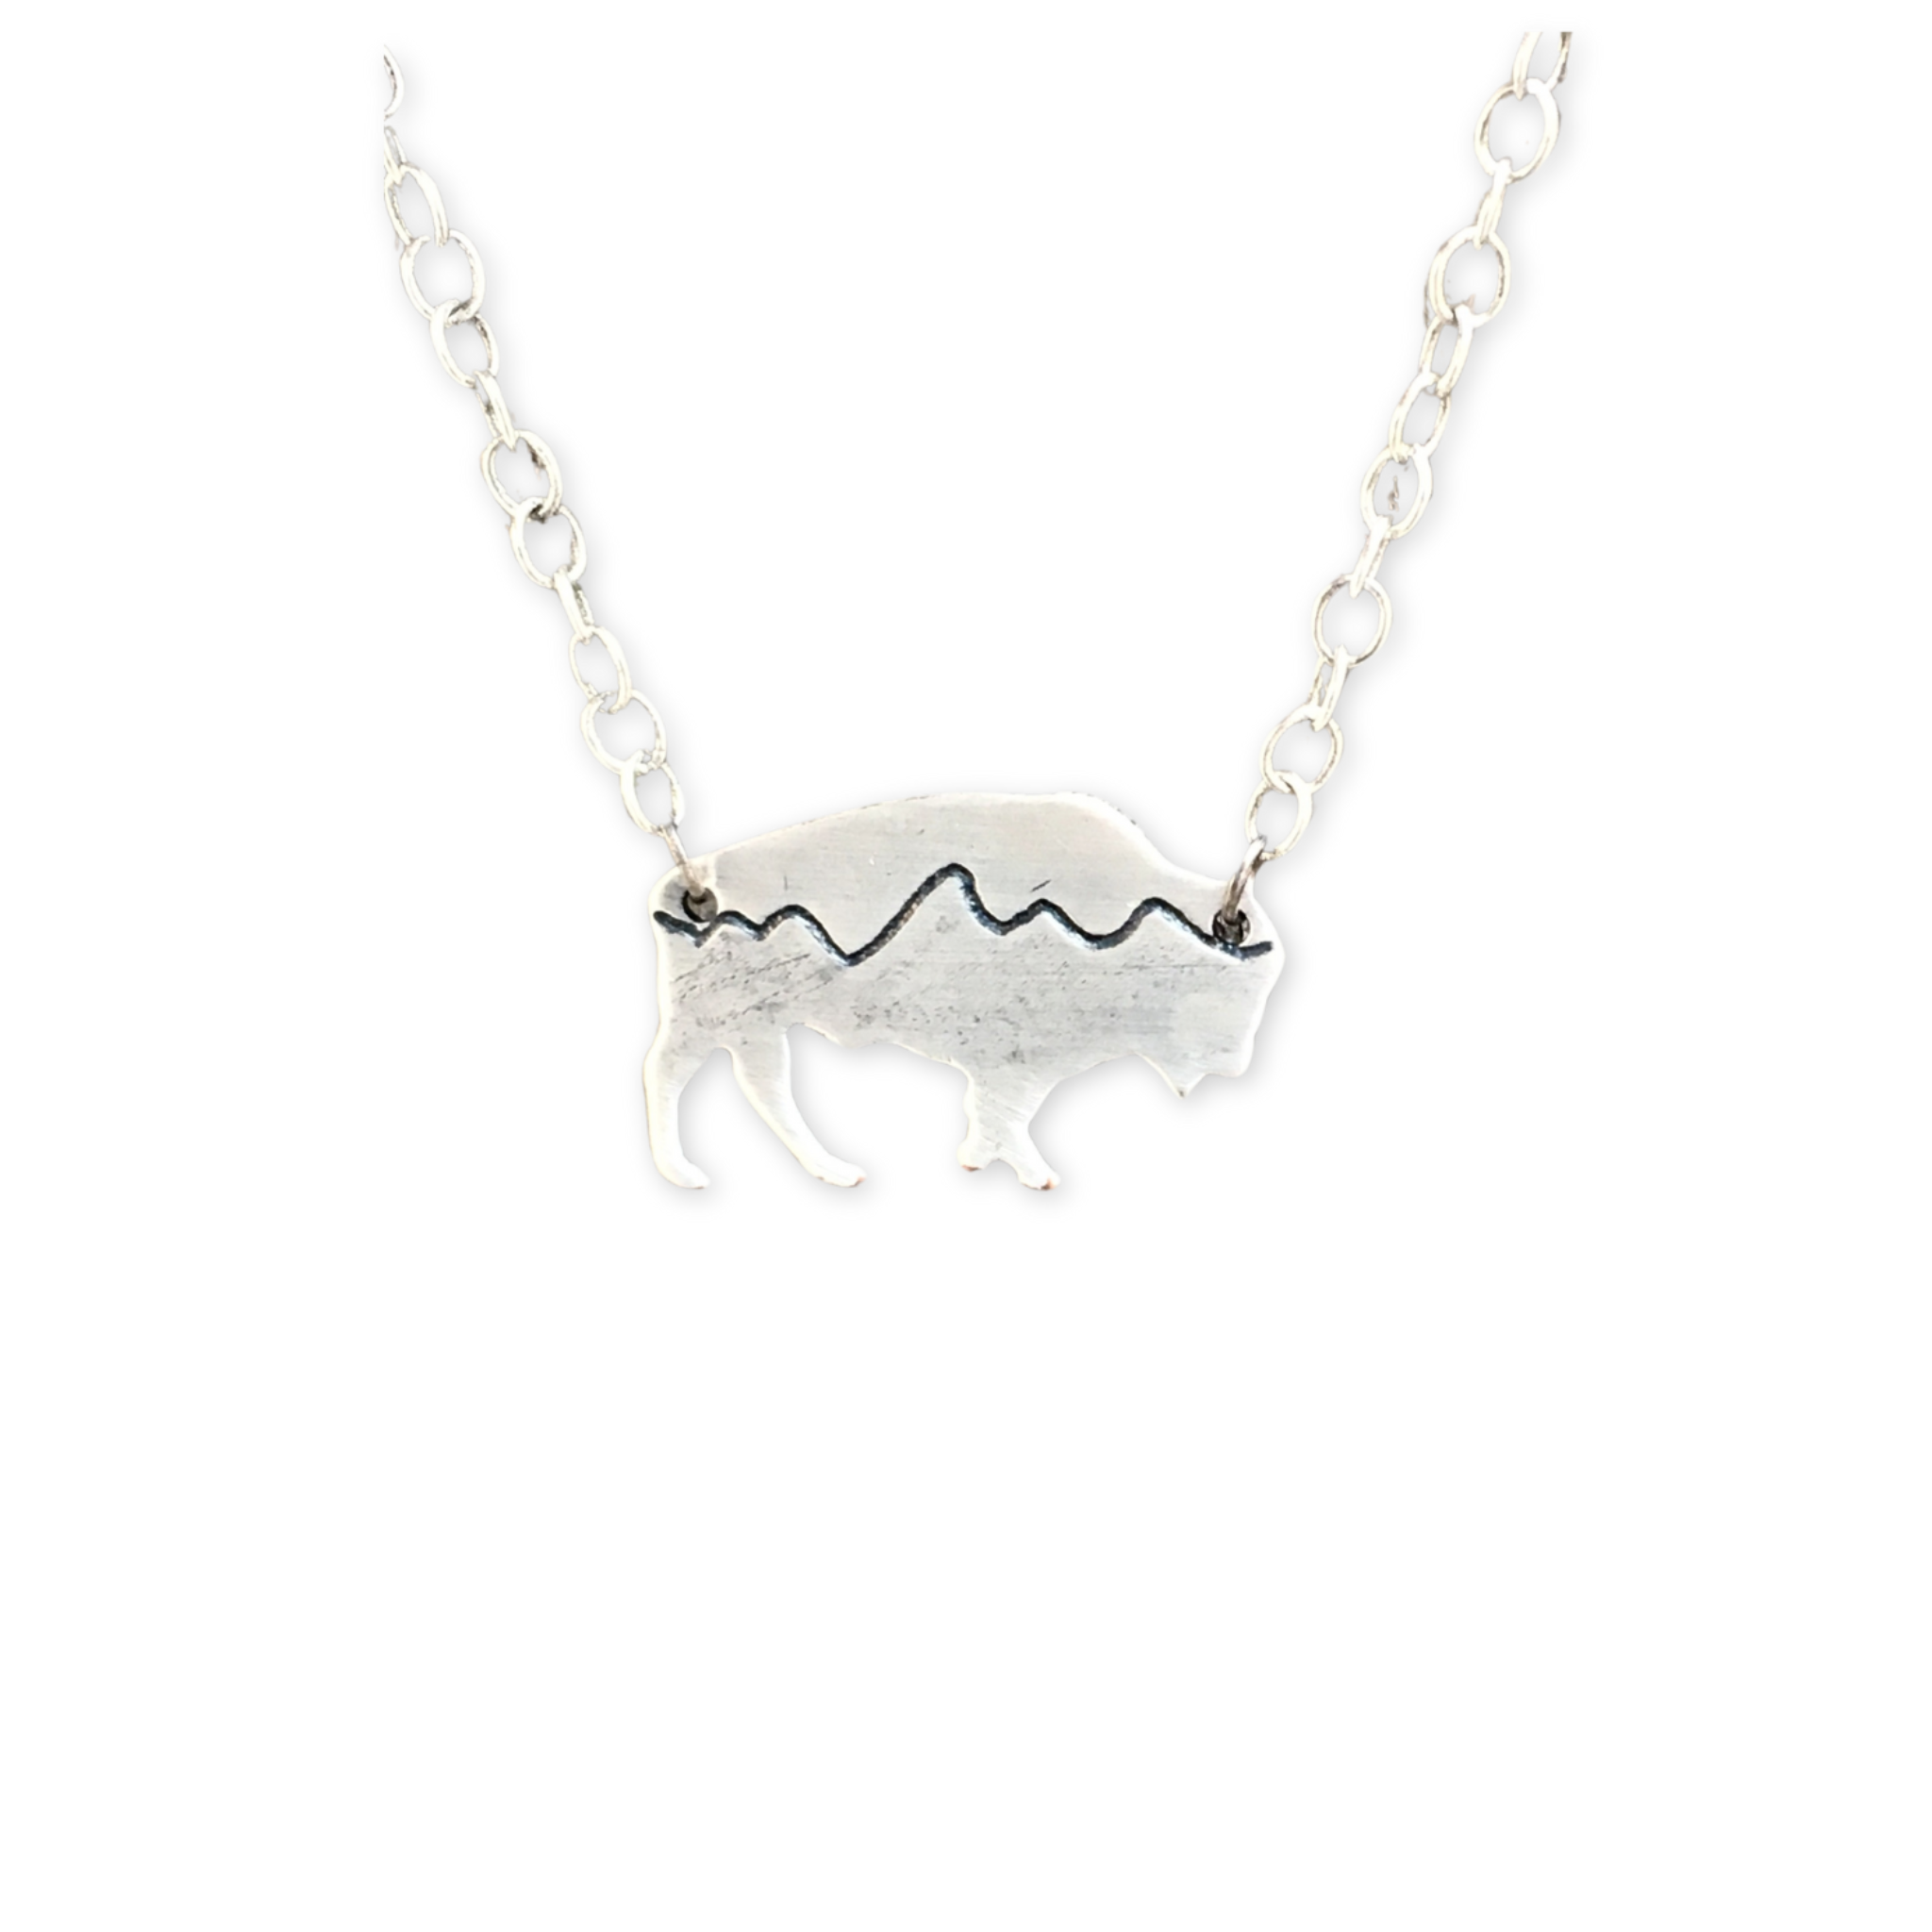 silver necklace with a bison pendant with tetons design